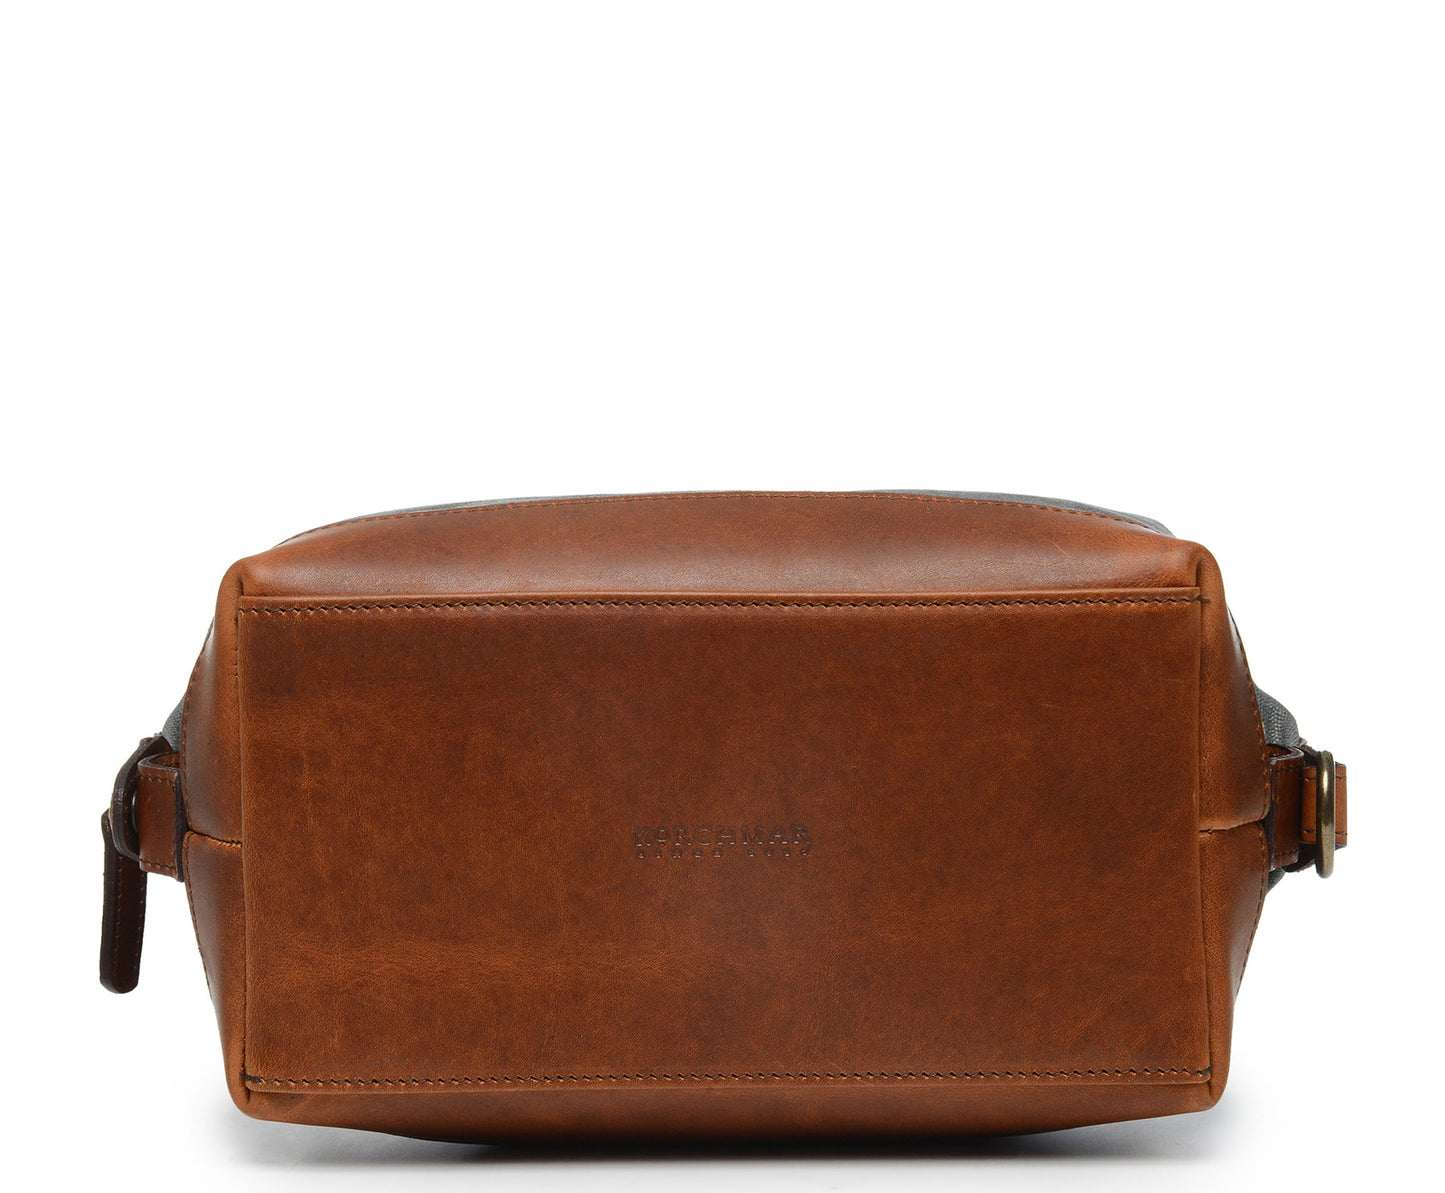 Ryder  | Waxed Cotton Canvas Dopp Kit | Zipper Toilet Kit | Travel Bag with Leather Trim | Made in America | Korchmar